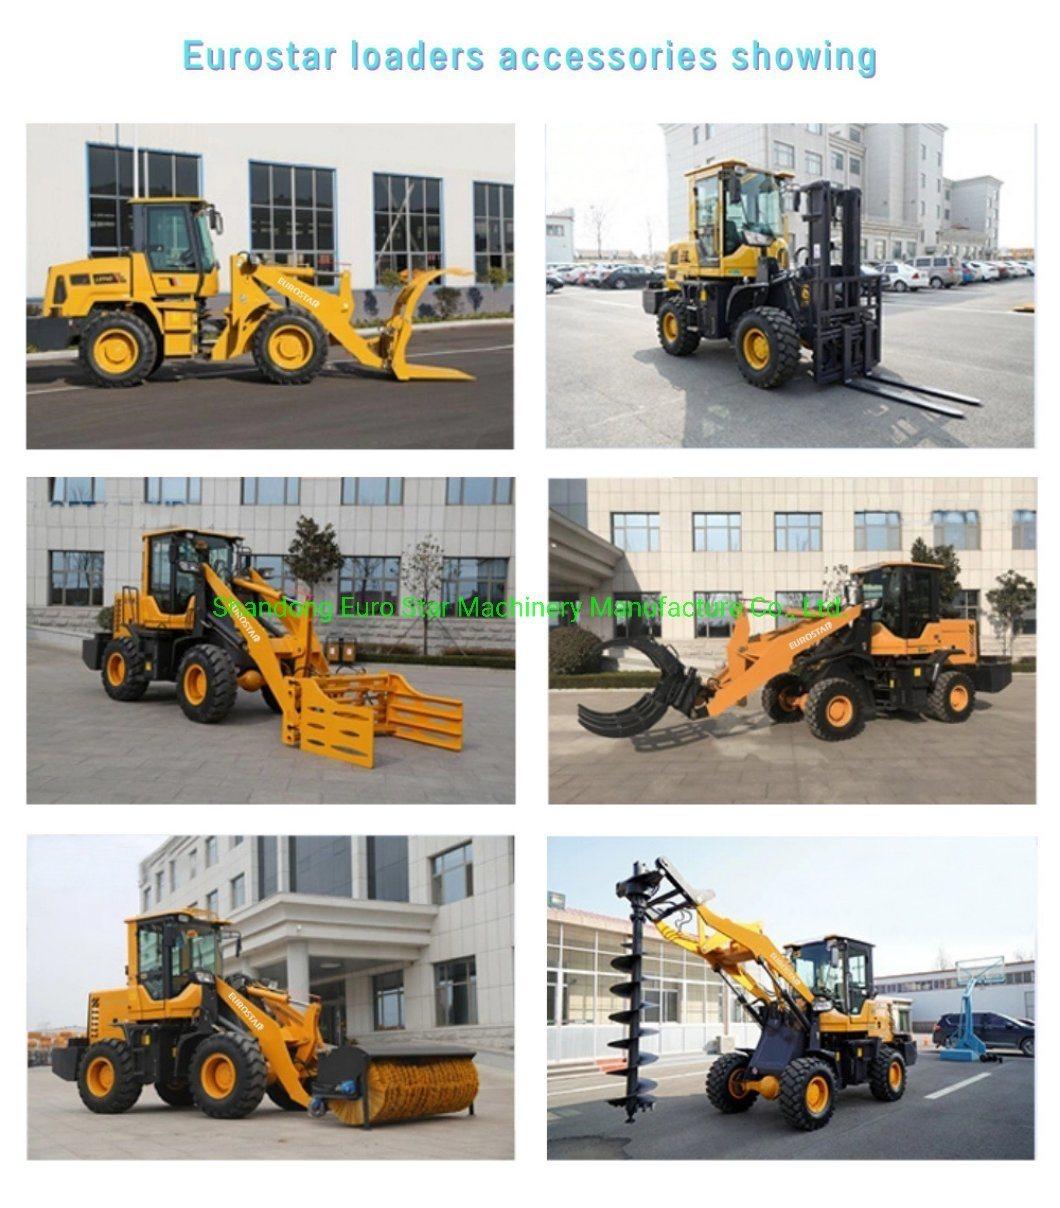 CE 1.6t-2.0t Wheel Loader Hot Sale Model Farming Construction Machinery Mini Loader with Variety Attachments